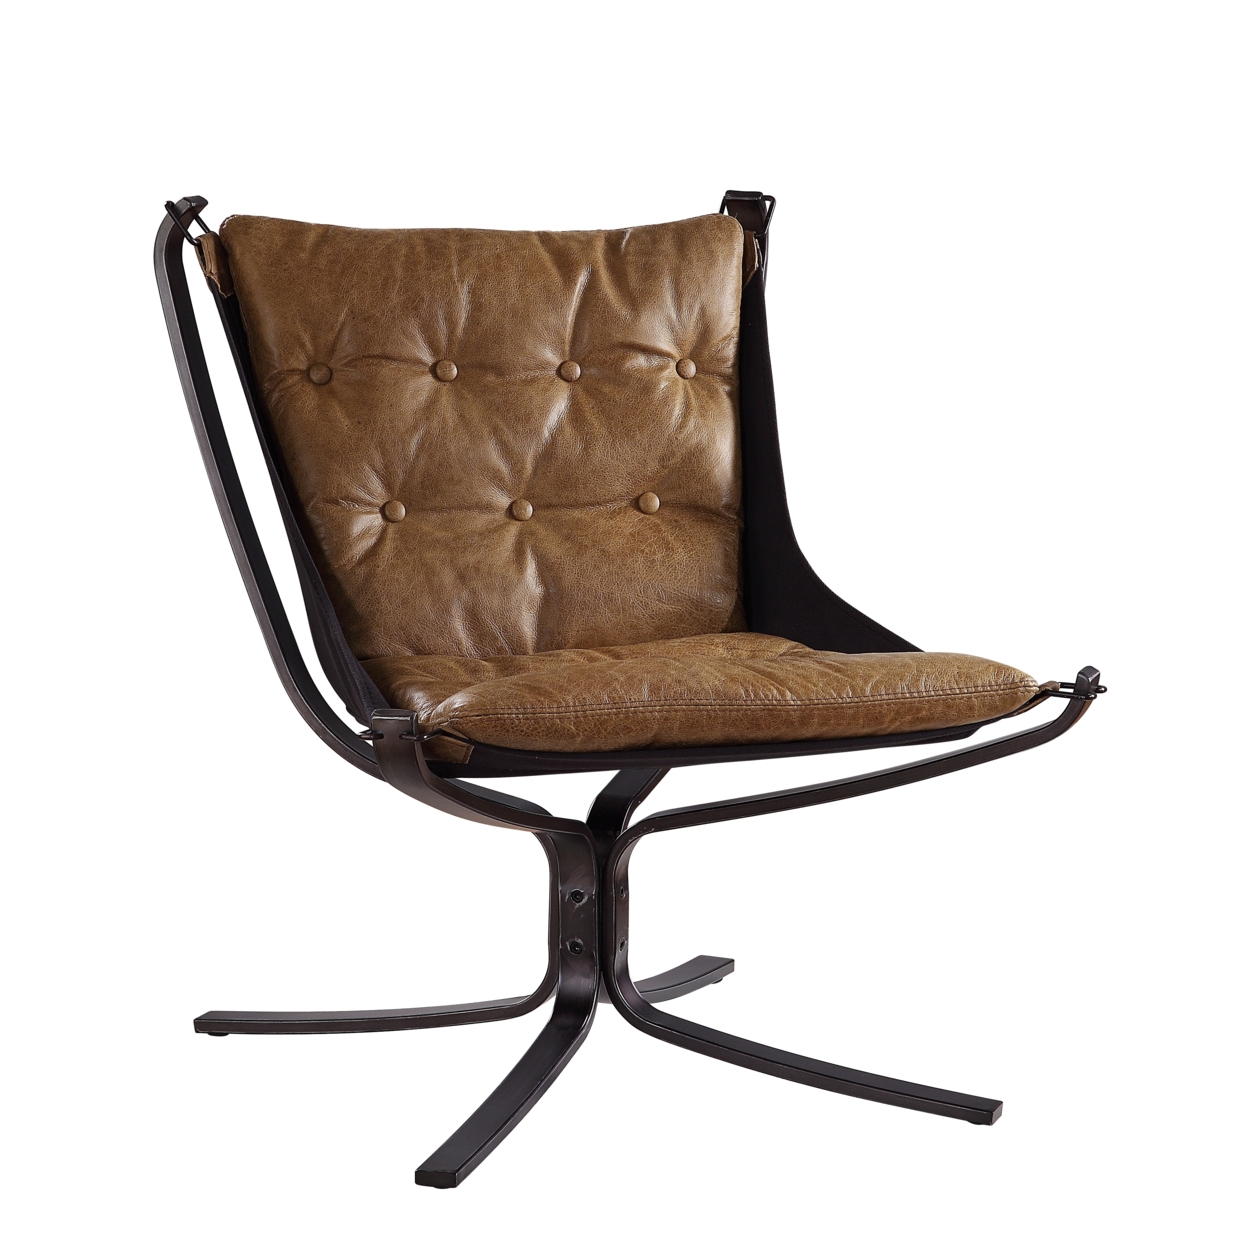 Faux Leather Upholstered Metal Frame Accent Chair With Star Base,Brown- Saltoro Sherpi